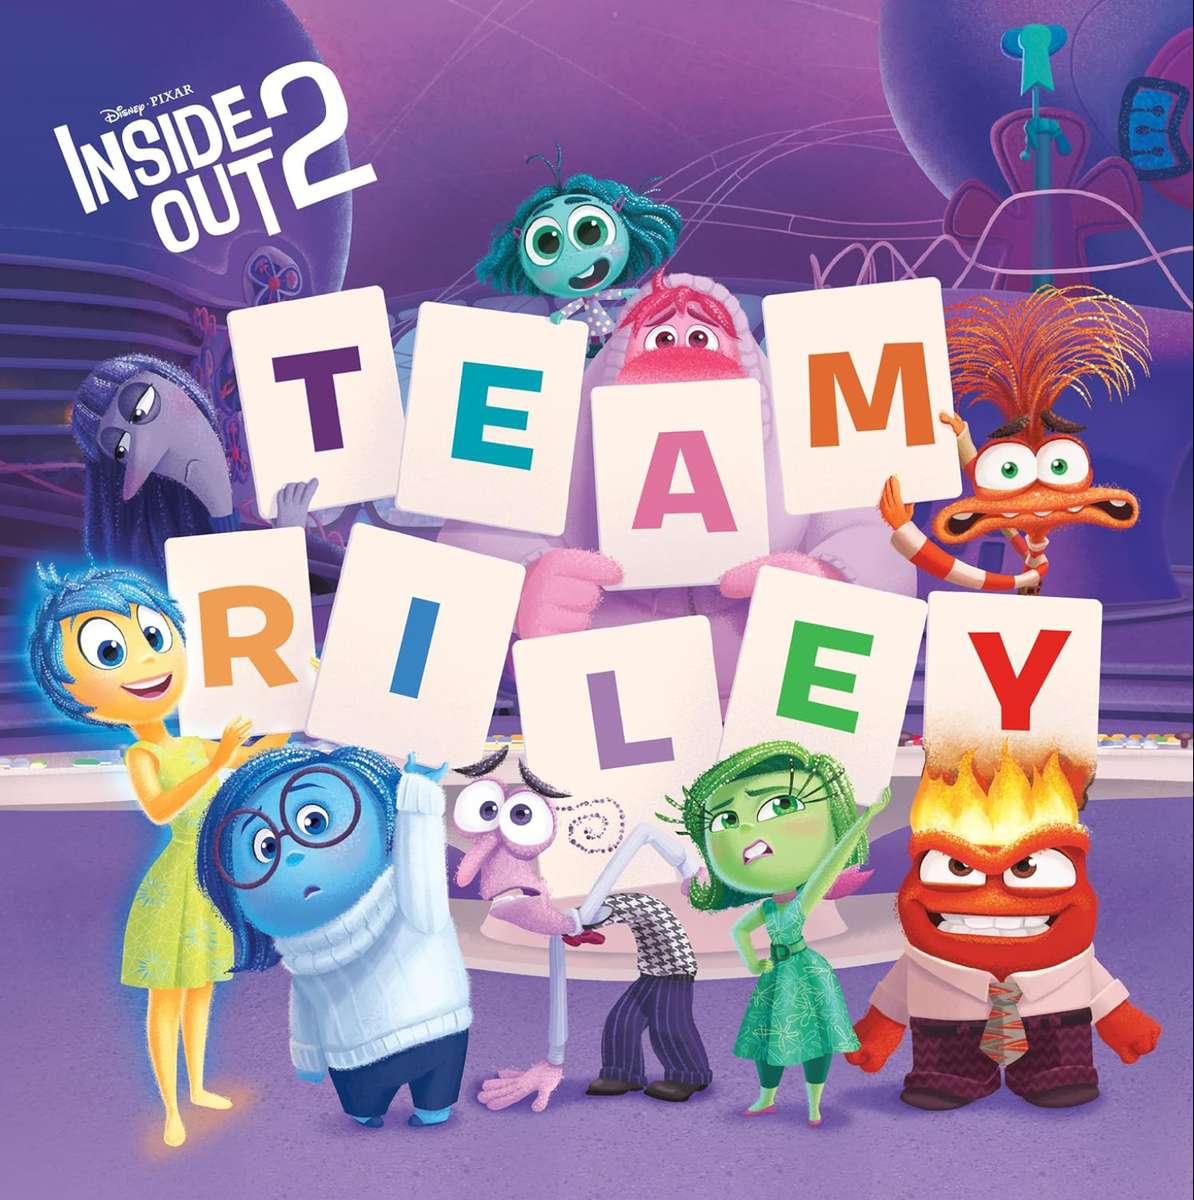 Inside Out 2 Pictureback Book❤️❤️❤️❤️ online puzzle